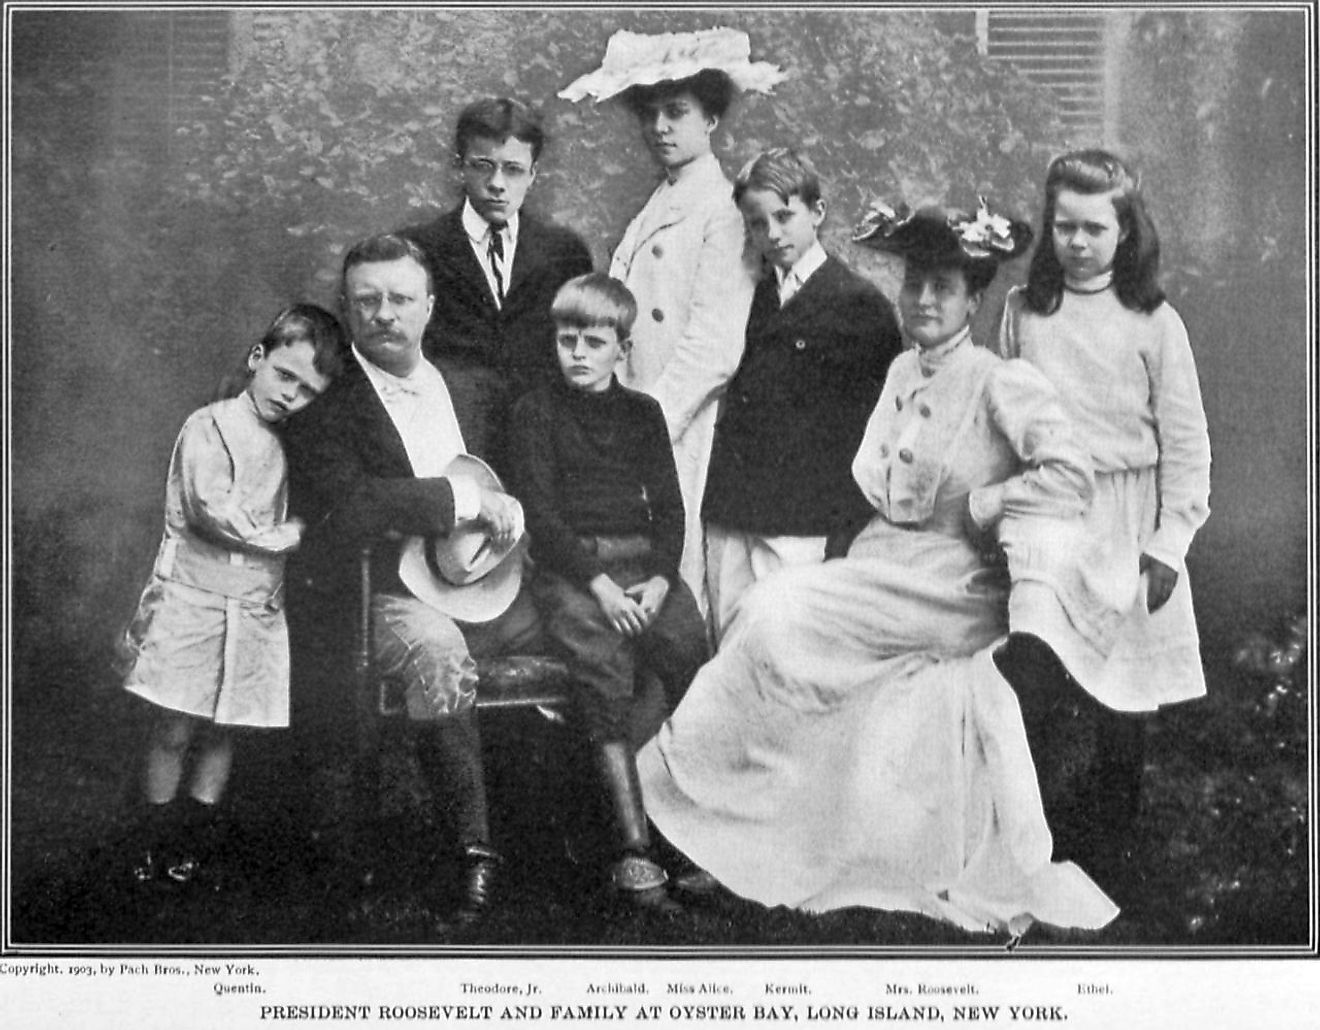 President Roosevelt with his family at Oyster Bay, circa 1903.